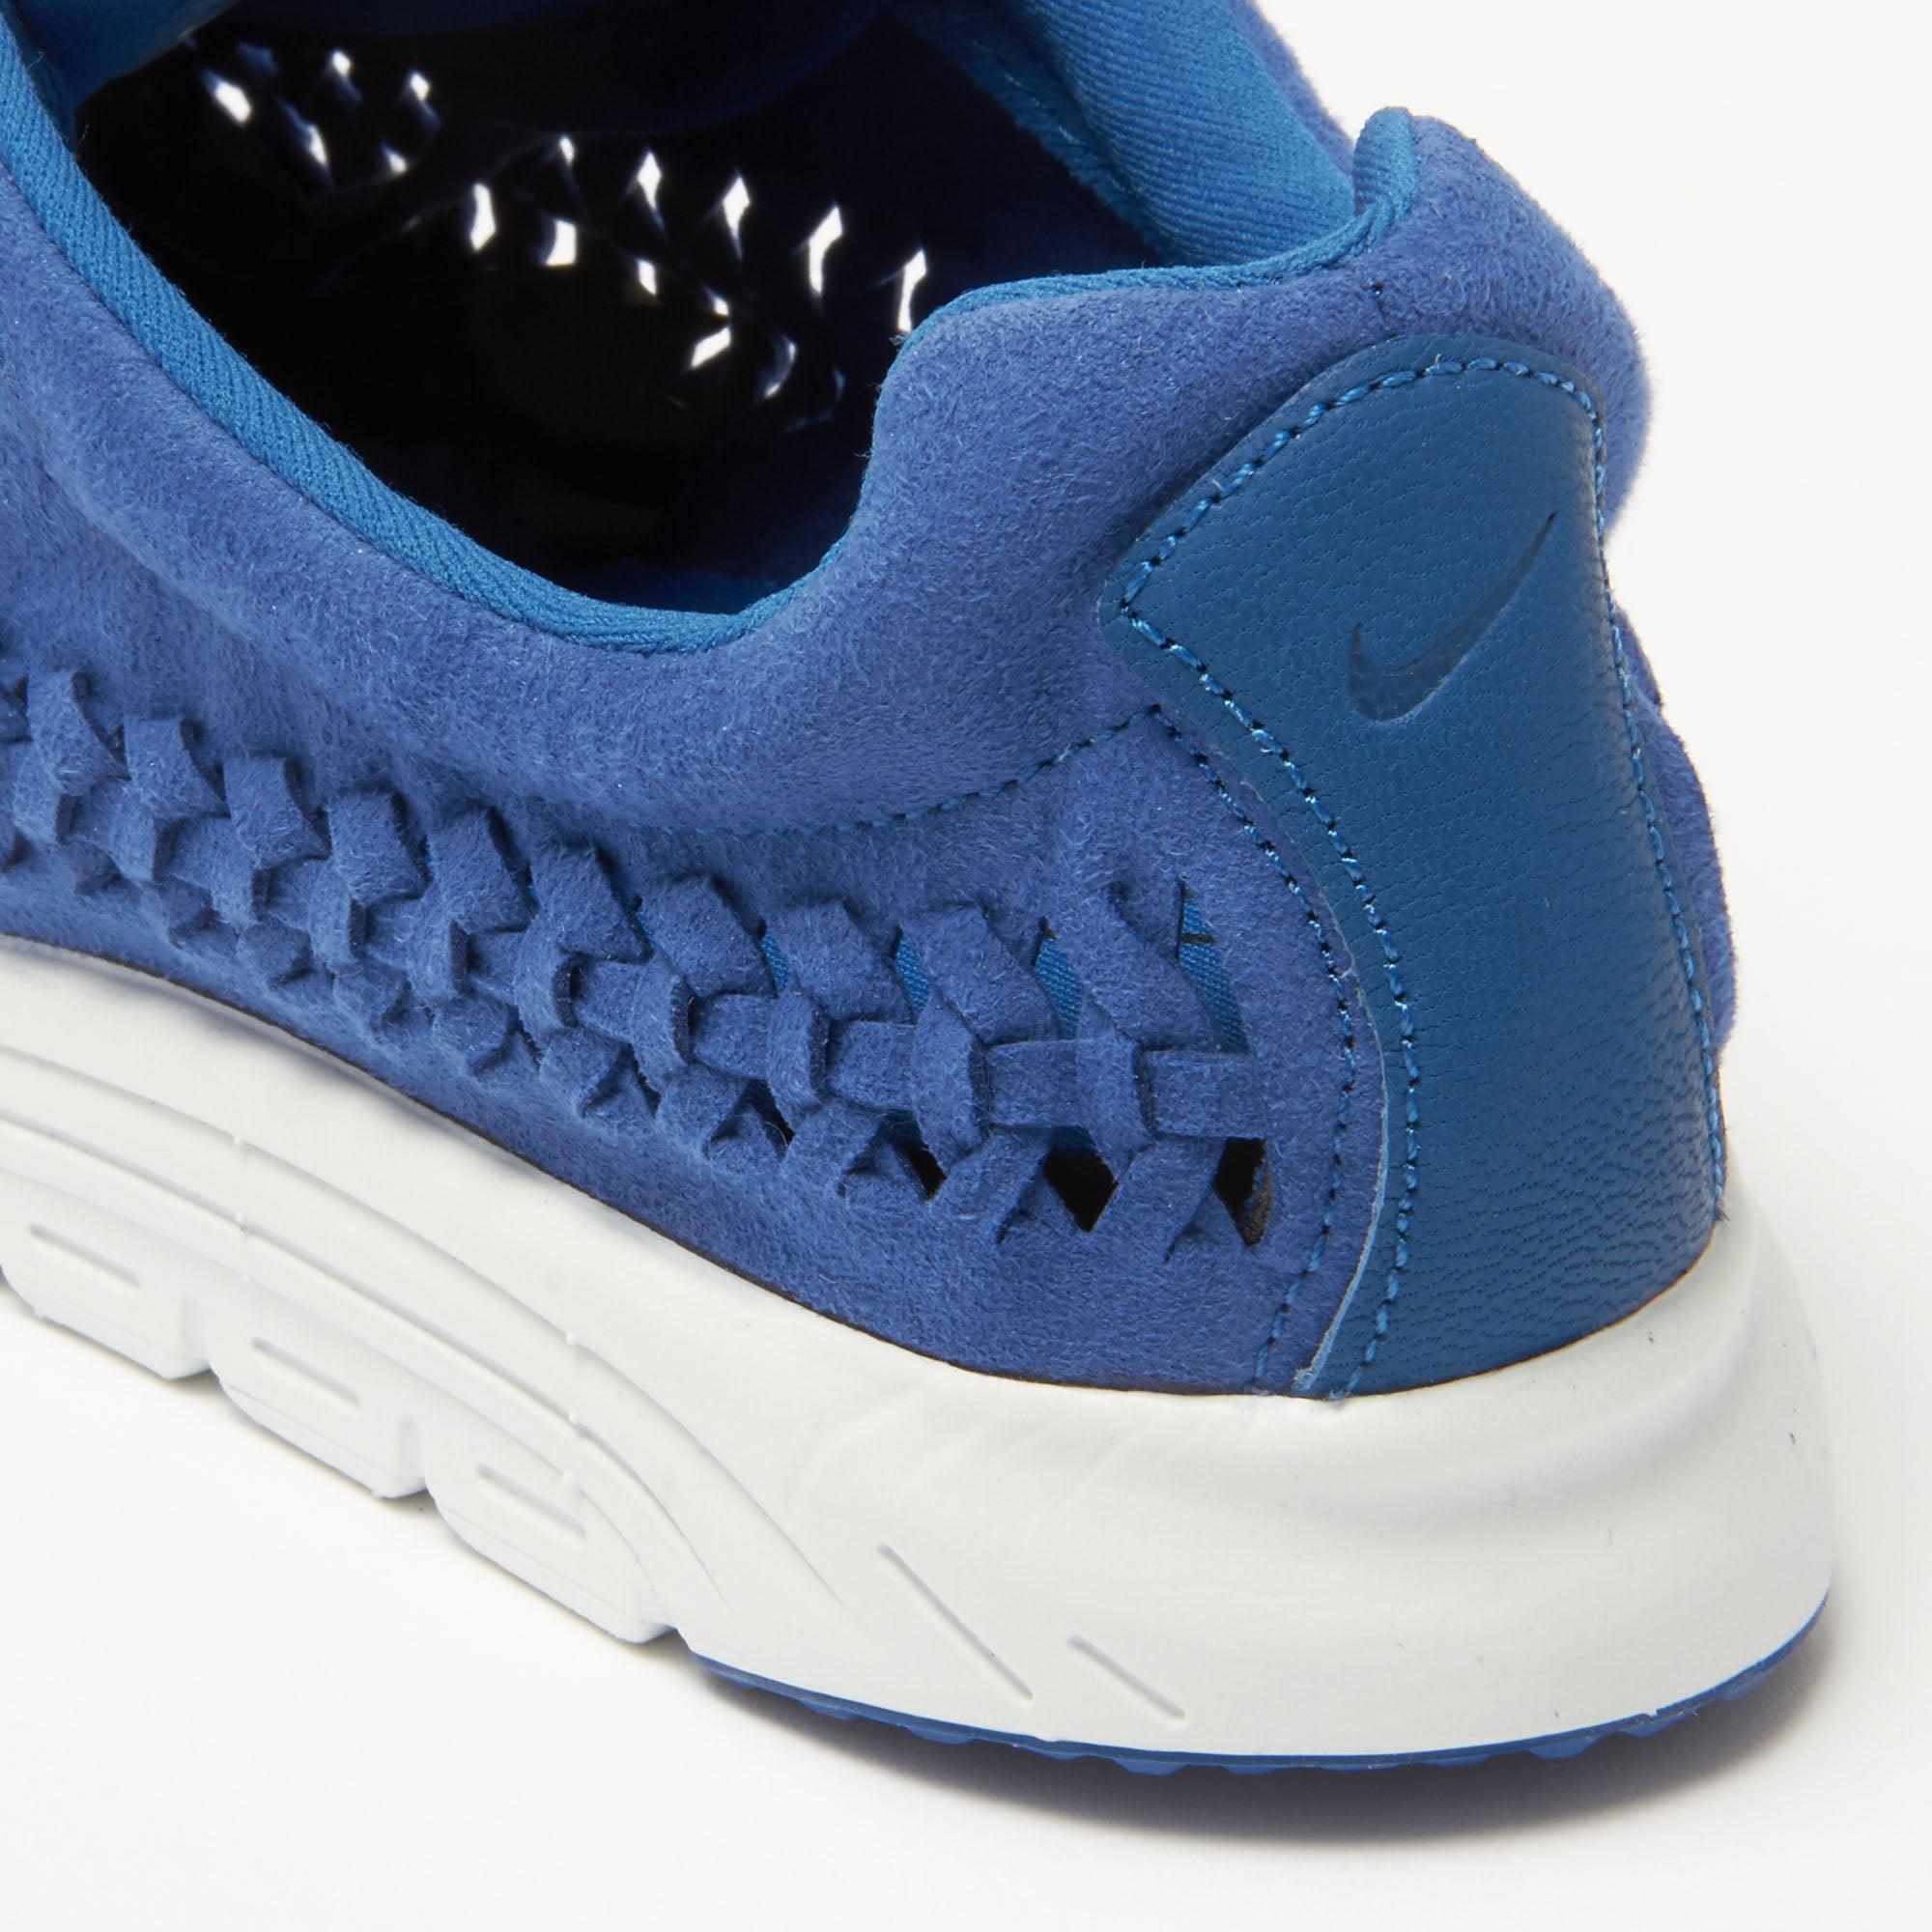 Nike Synthetic Mayfly Woven Royal Blue Sneakers for Men - Lyst